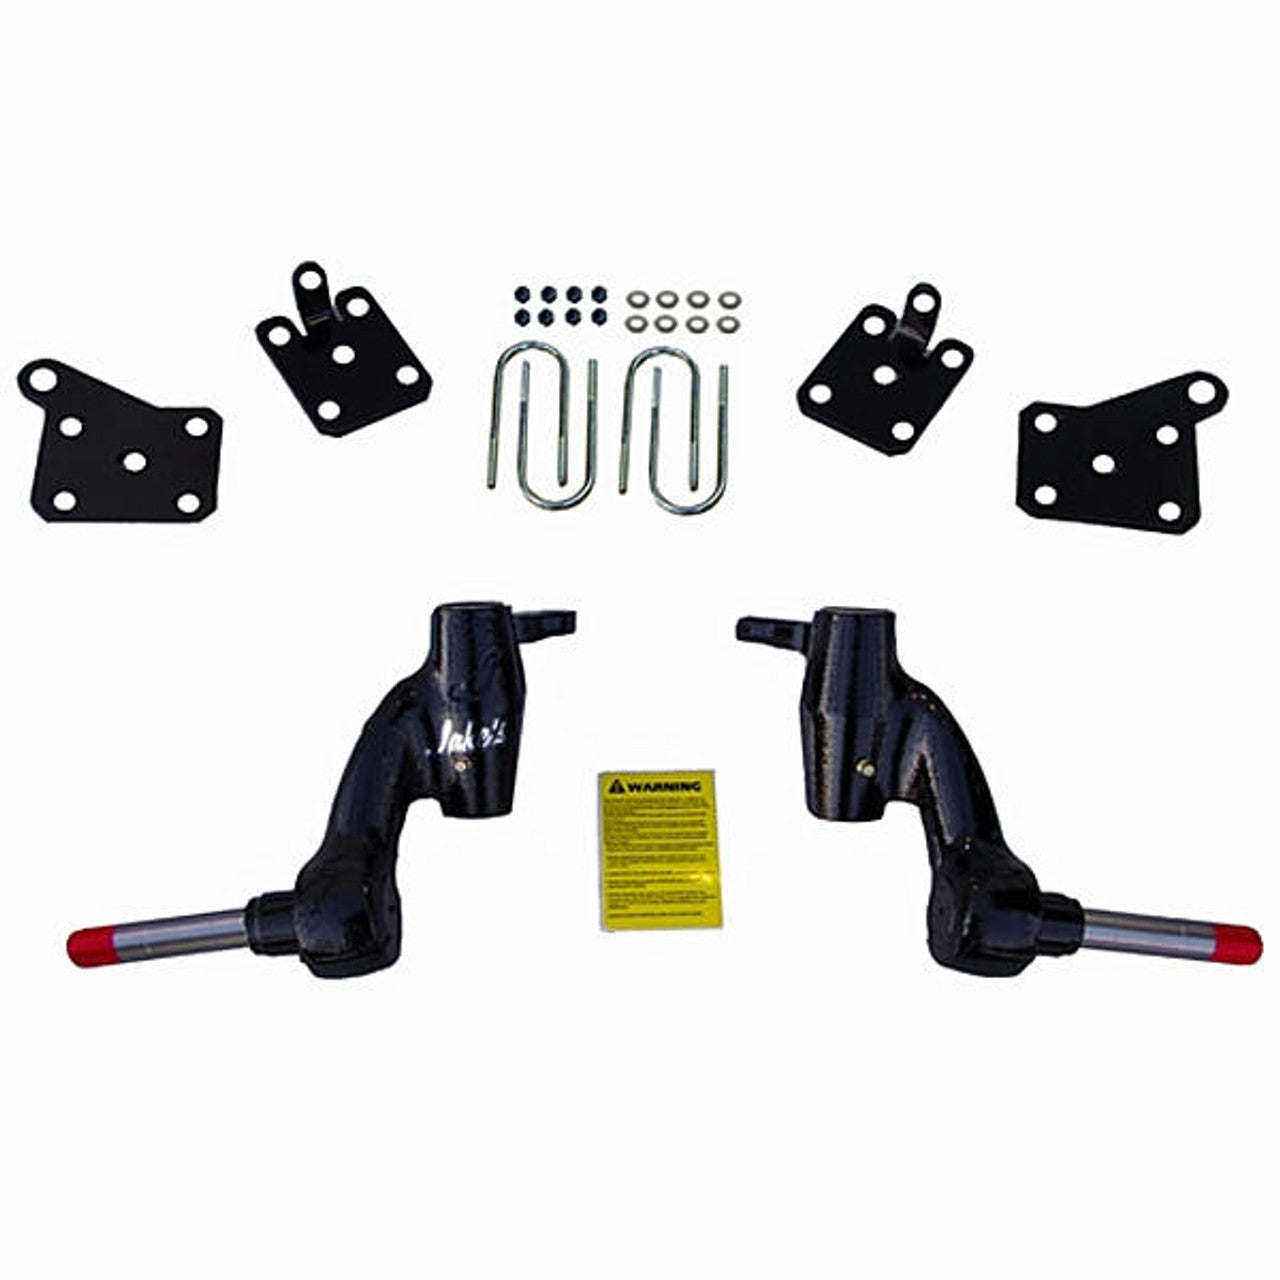 JAKE'S EZGO RXV ELECTRIC Golf Cart 3" SPINDLE LIFT KIT (FITS 2014-2021)